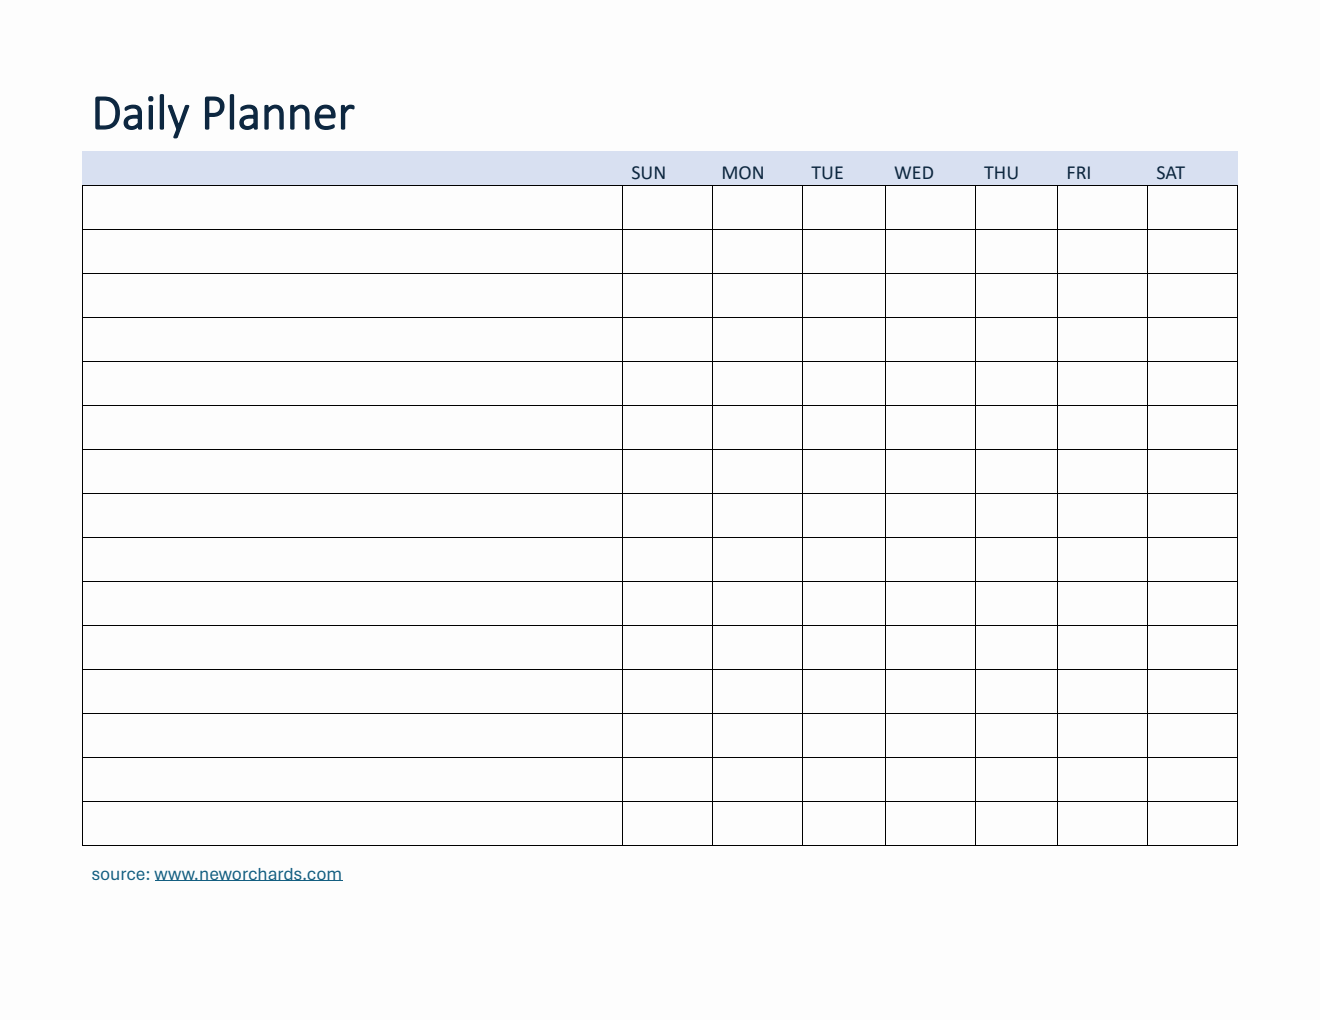 Daily Planner and Checklist Template in PDF (Customizable)